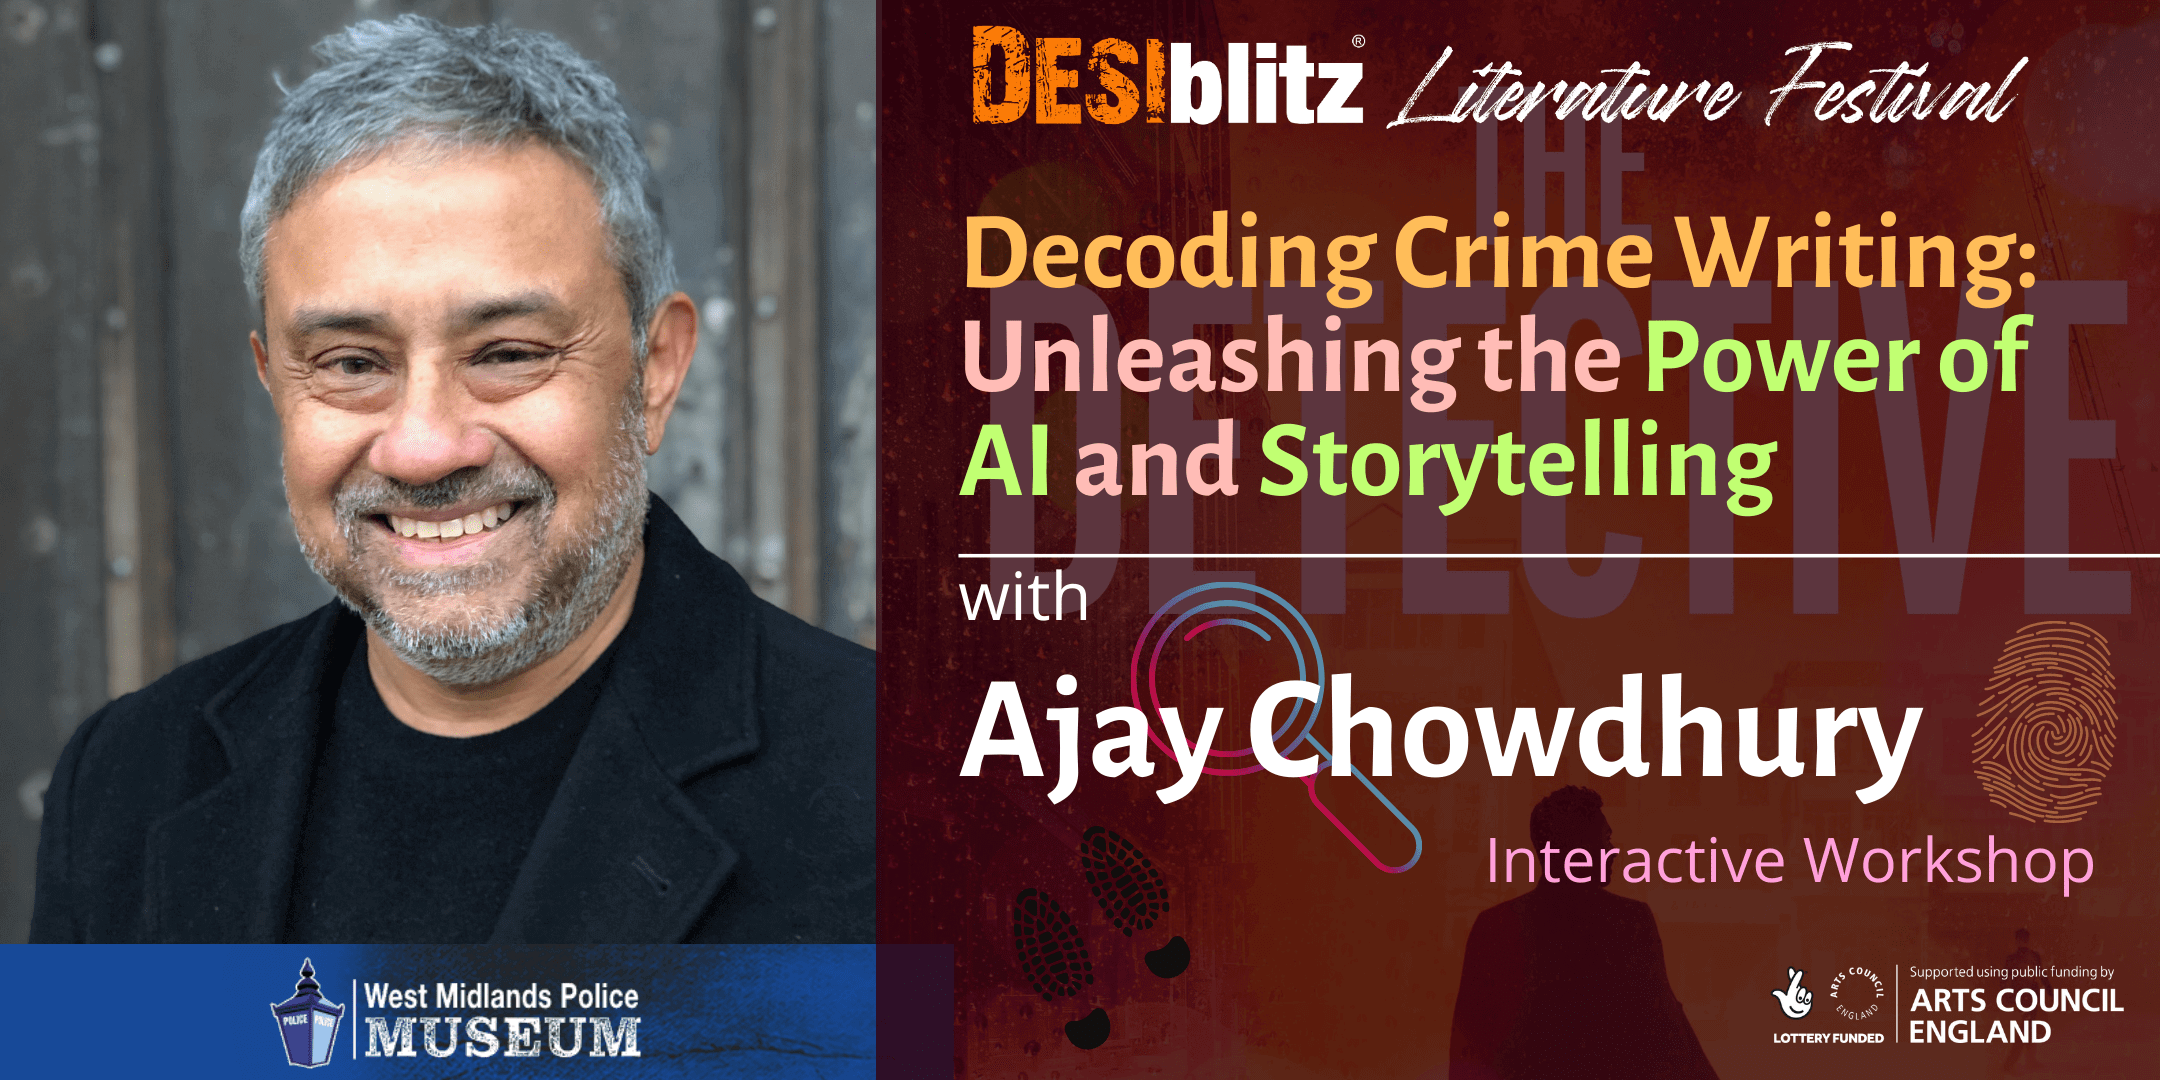 Decoding Crime Writing: Unleashing the Power of AI and Storytelling with Ajay Chowdhury